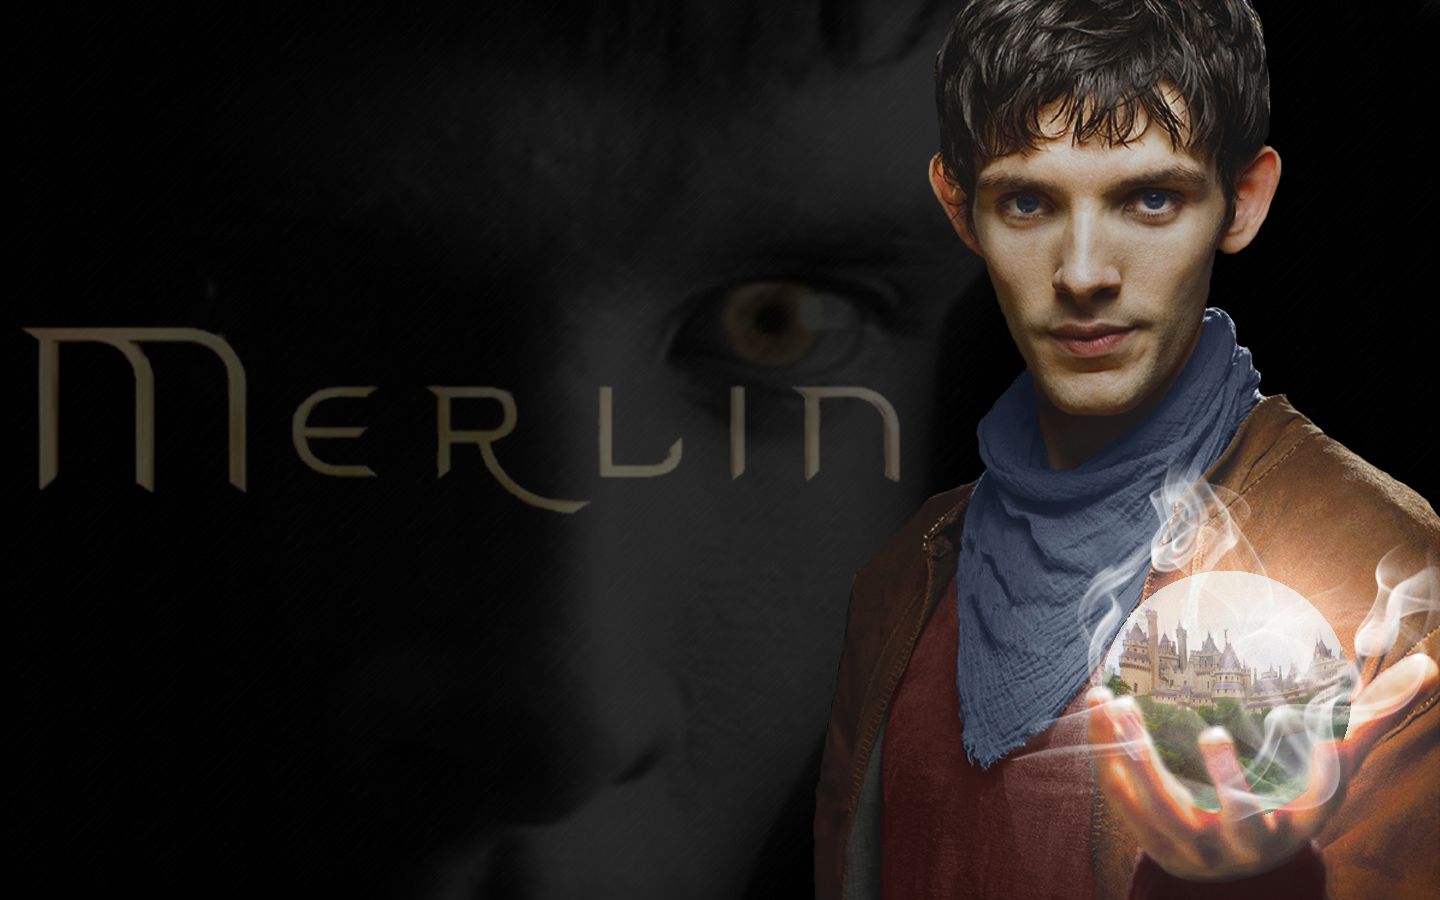 Merlin on BBC Wallpaper: The Fate. Merlin, Merlin quotes, Merlin series